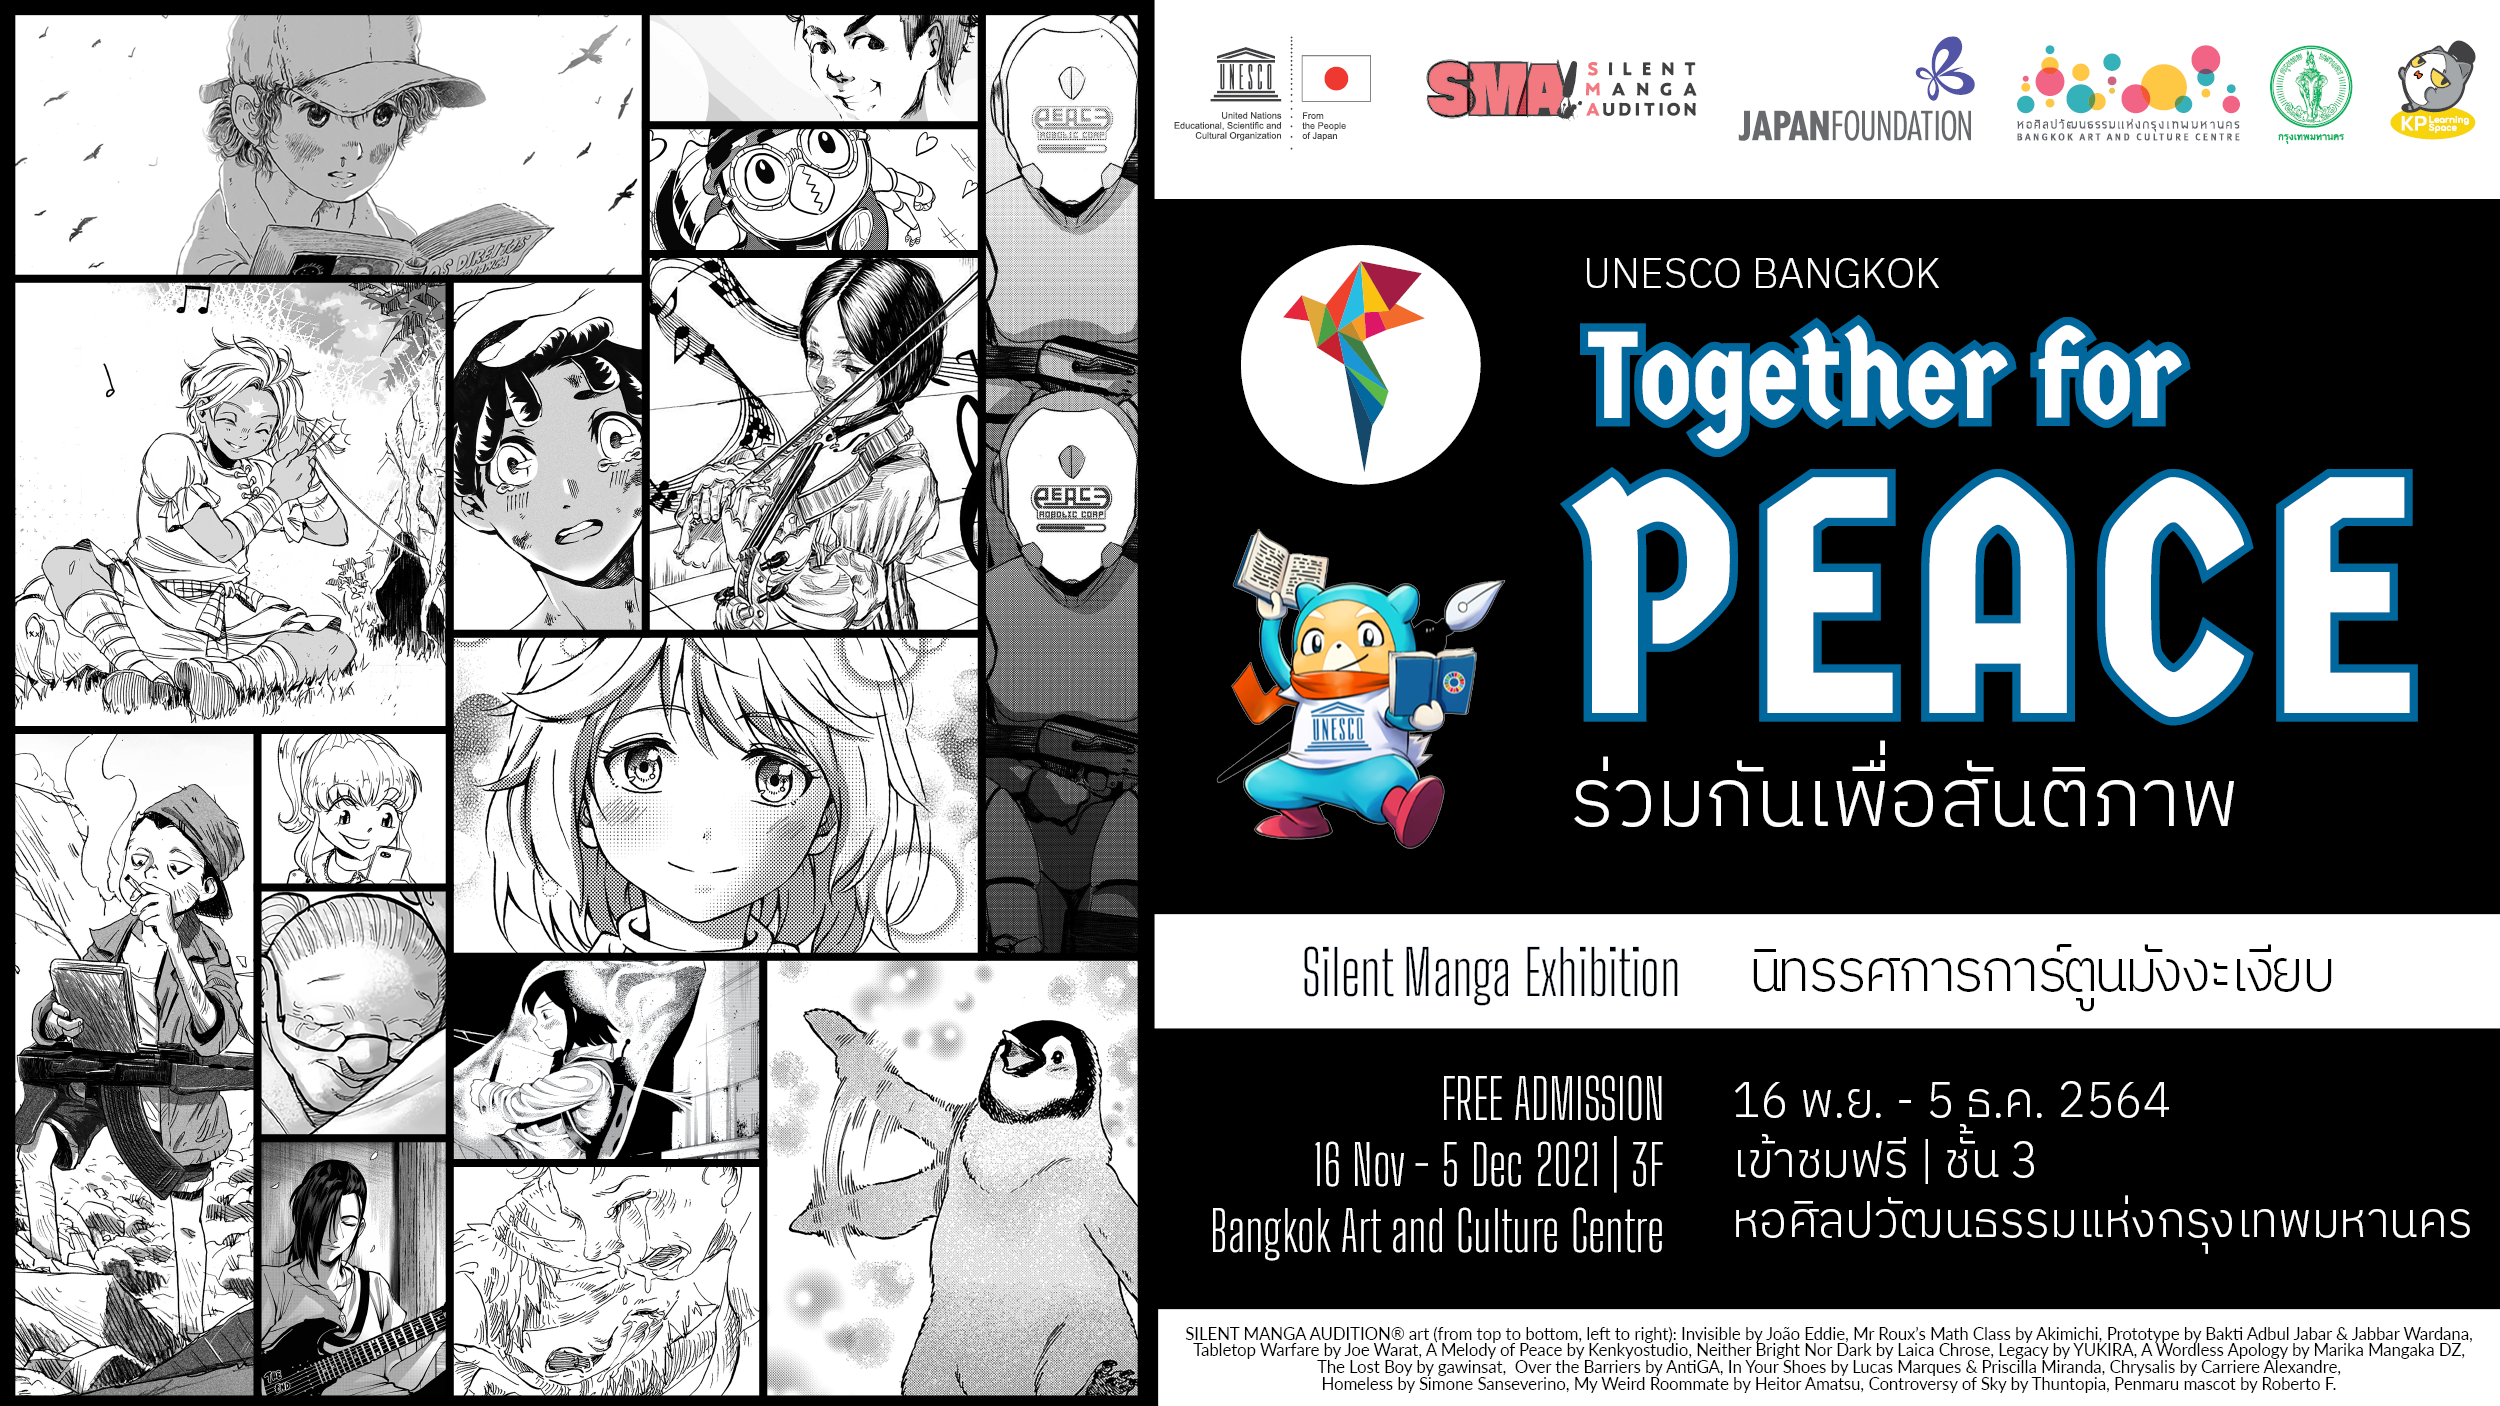 Silent manga exhibition sponsored by UNESCO in Thailand!